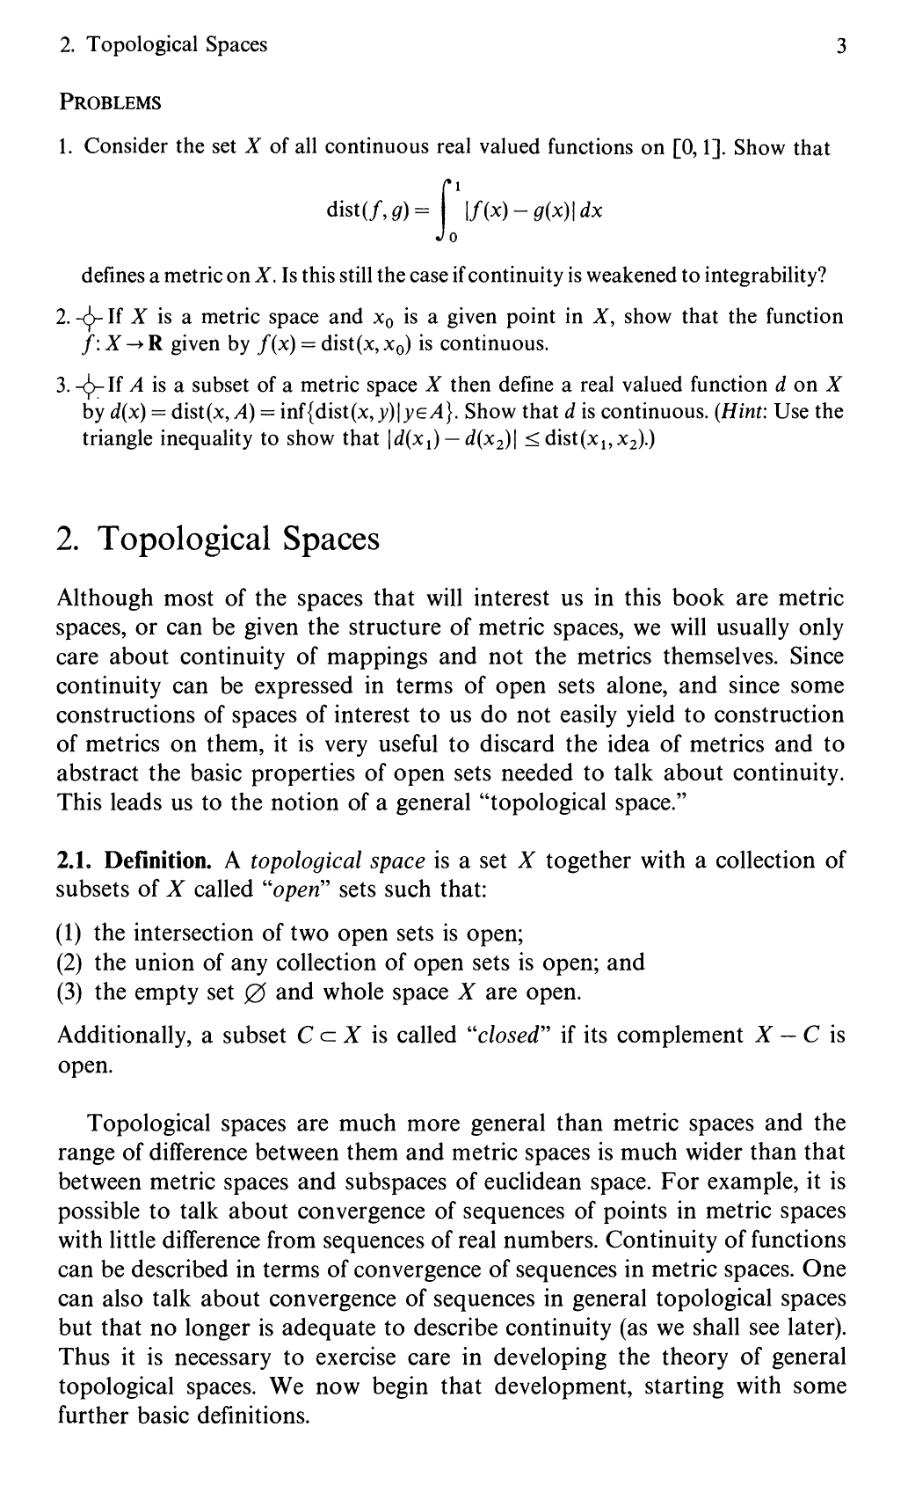 2. Topological Spaces